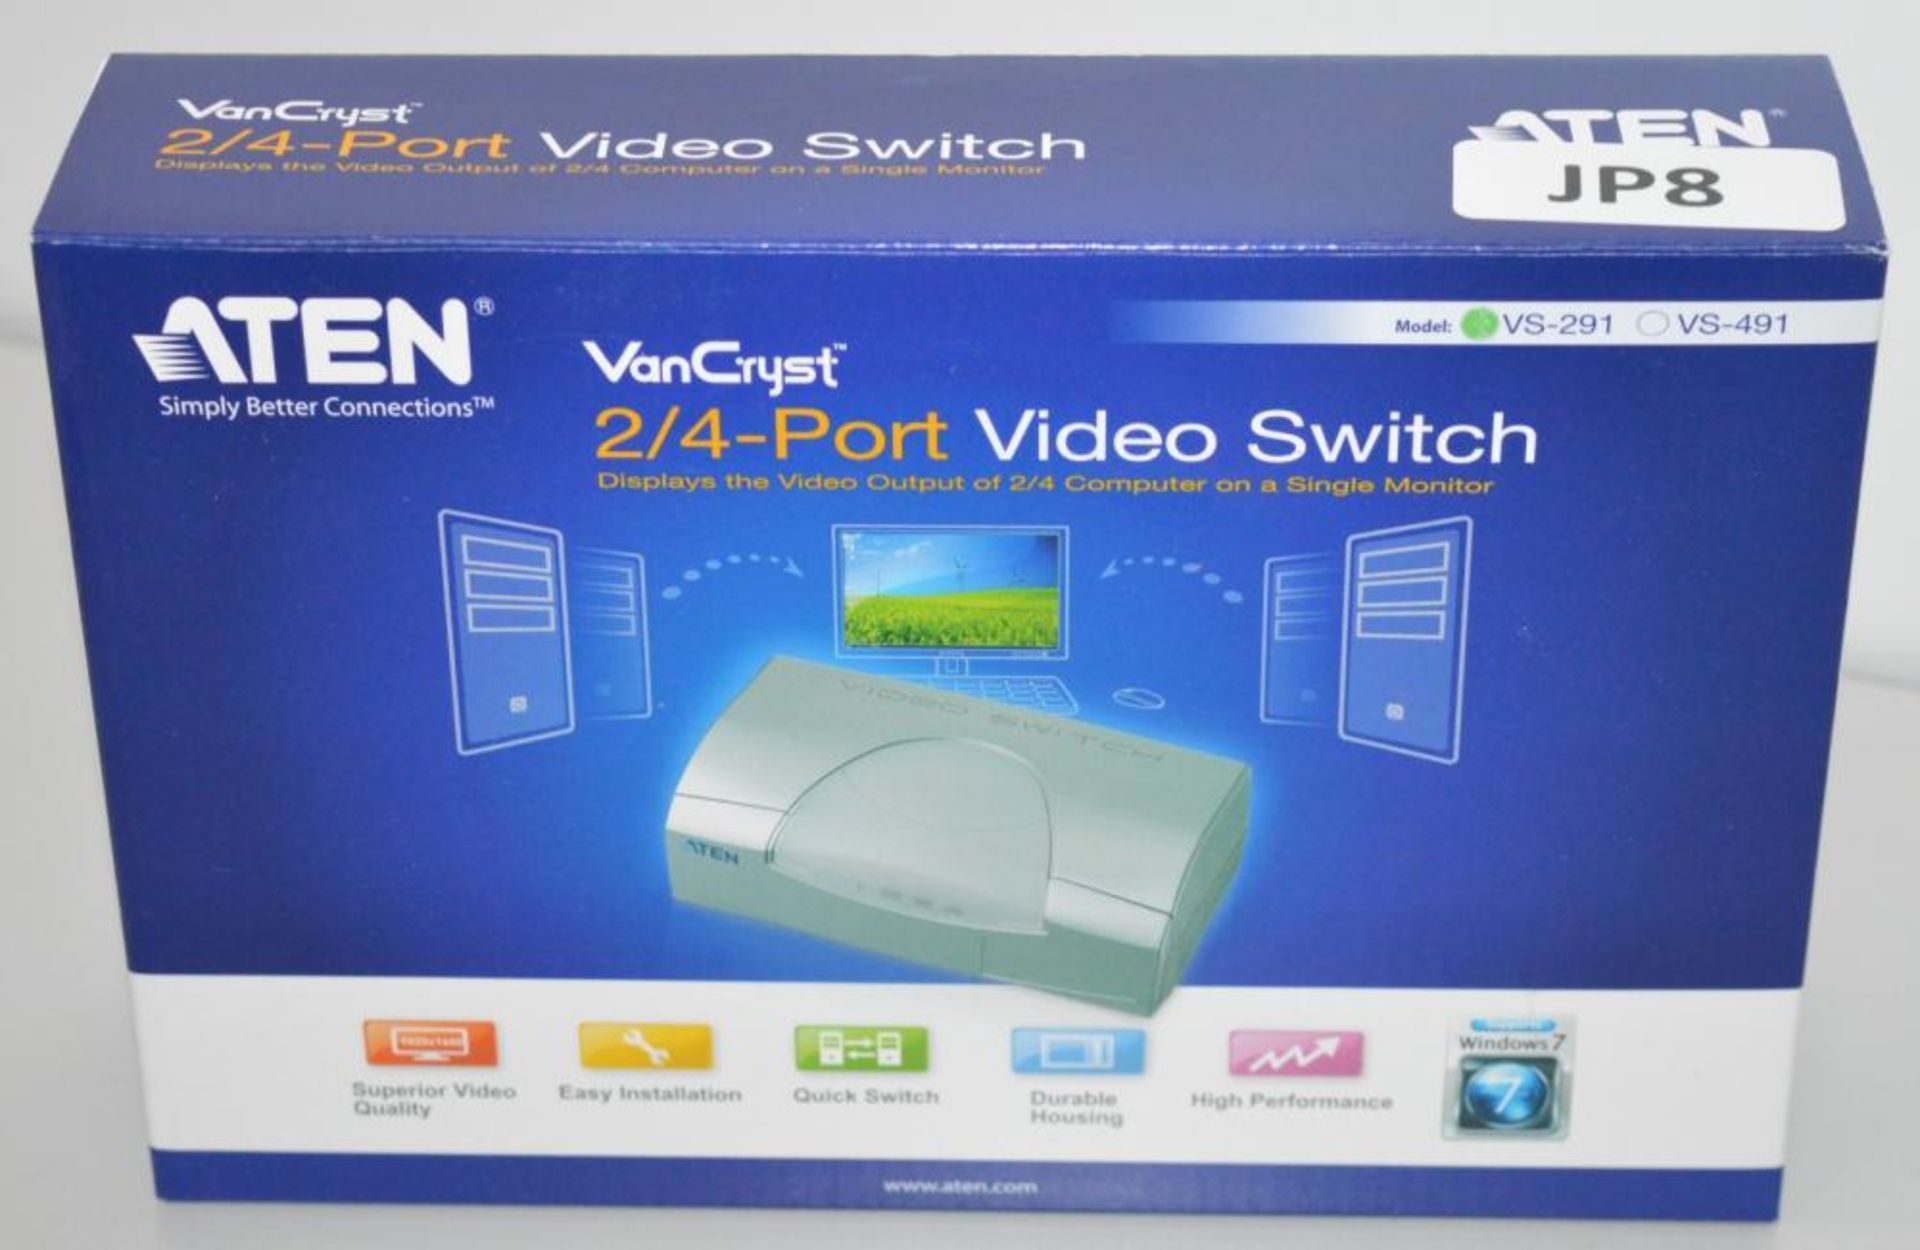 1 x Aten VanCryst 2/4 Port Video Switch - Displays the Video Output of 2/4 Computers on a Single